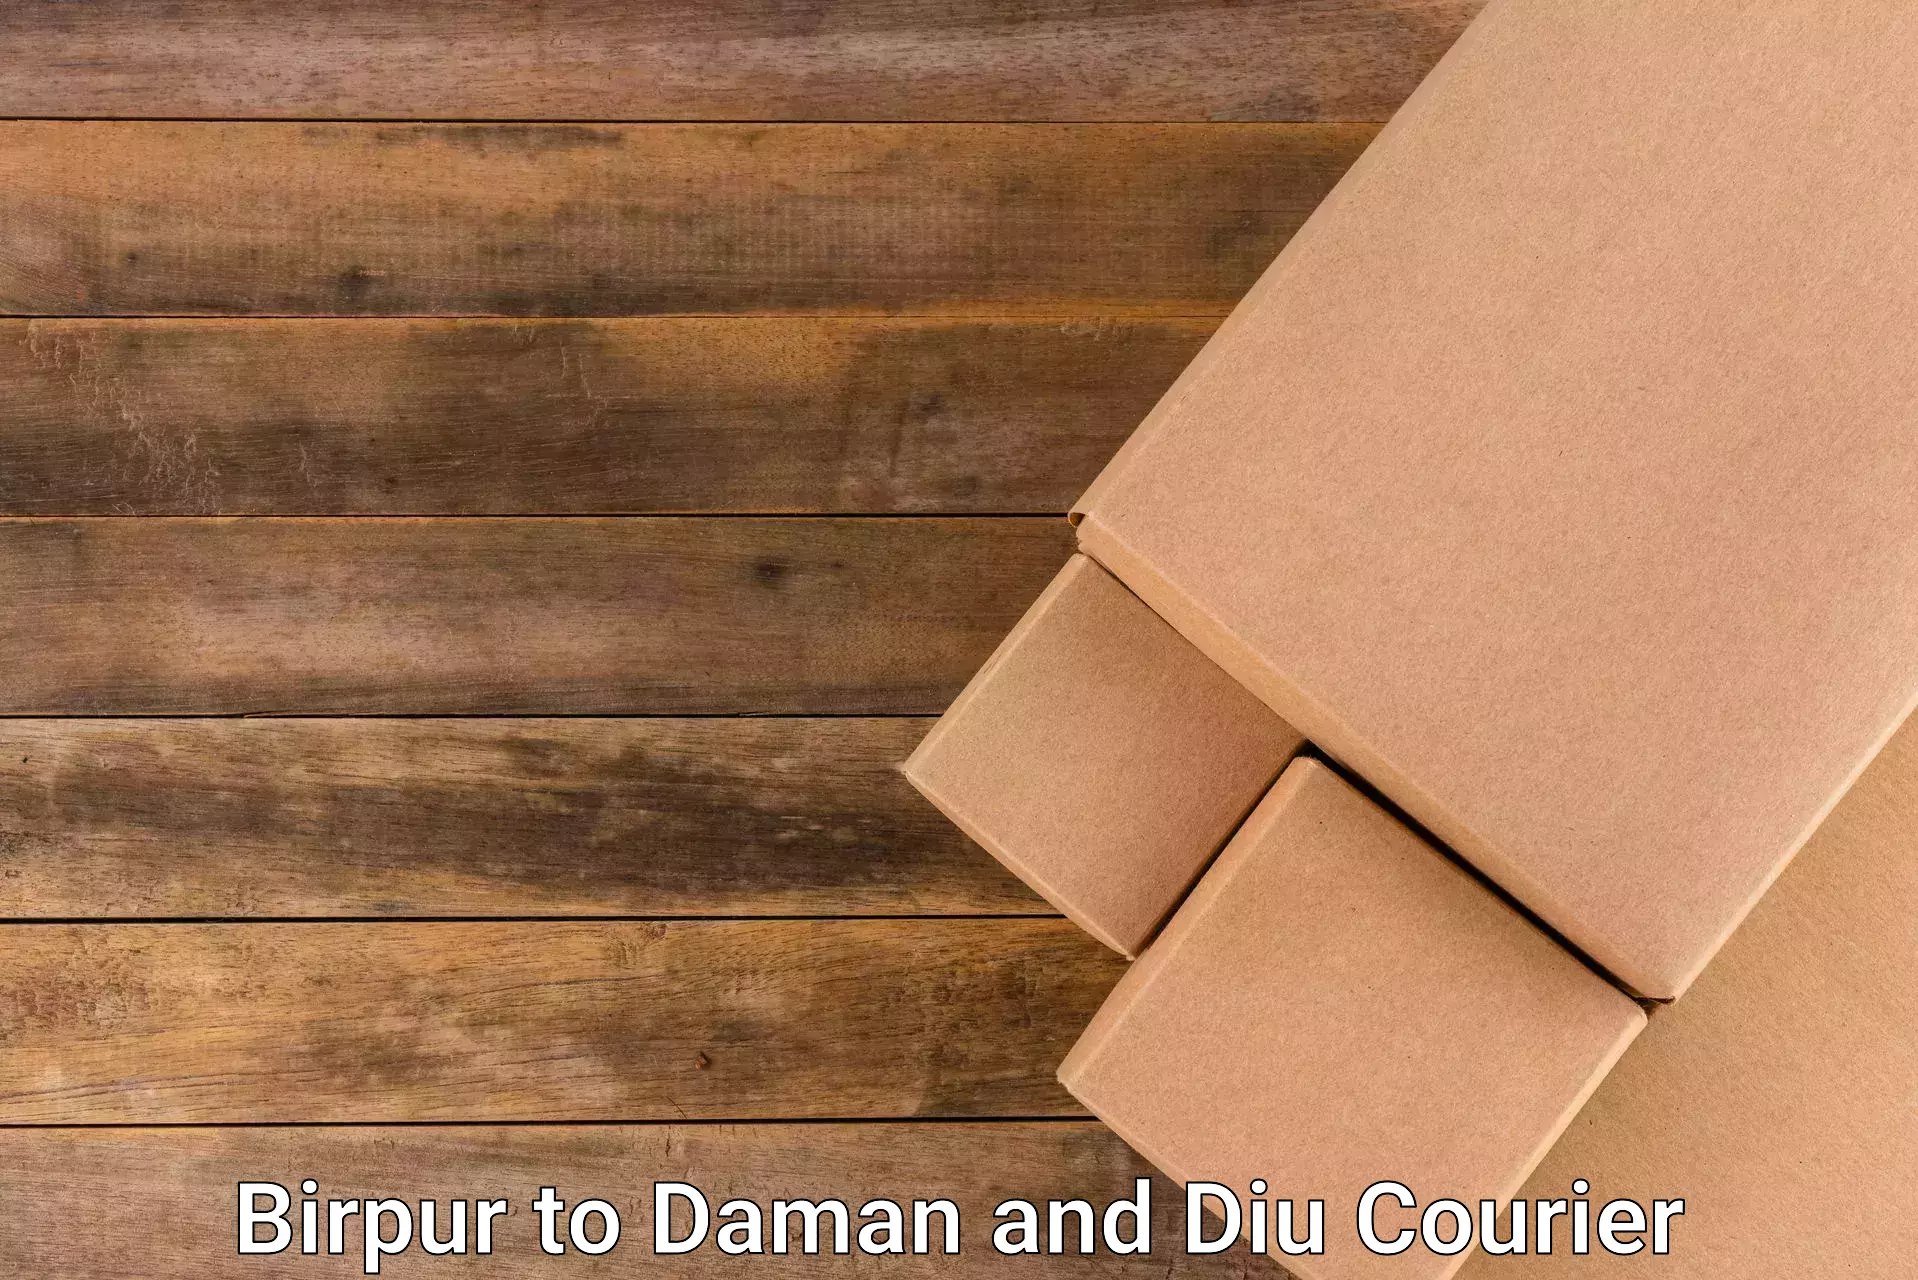 User-friendly delivery service Birpur to Daman and Diu